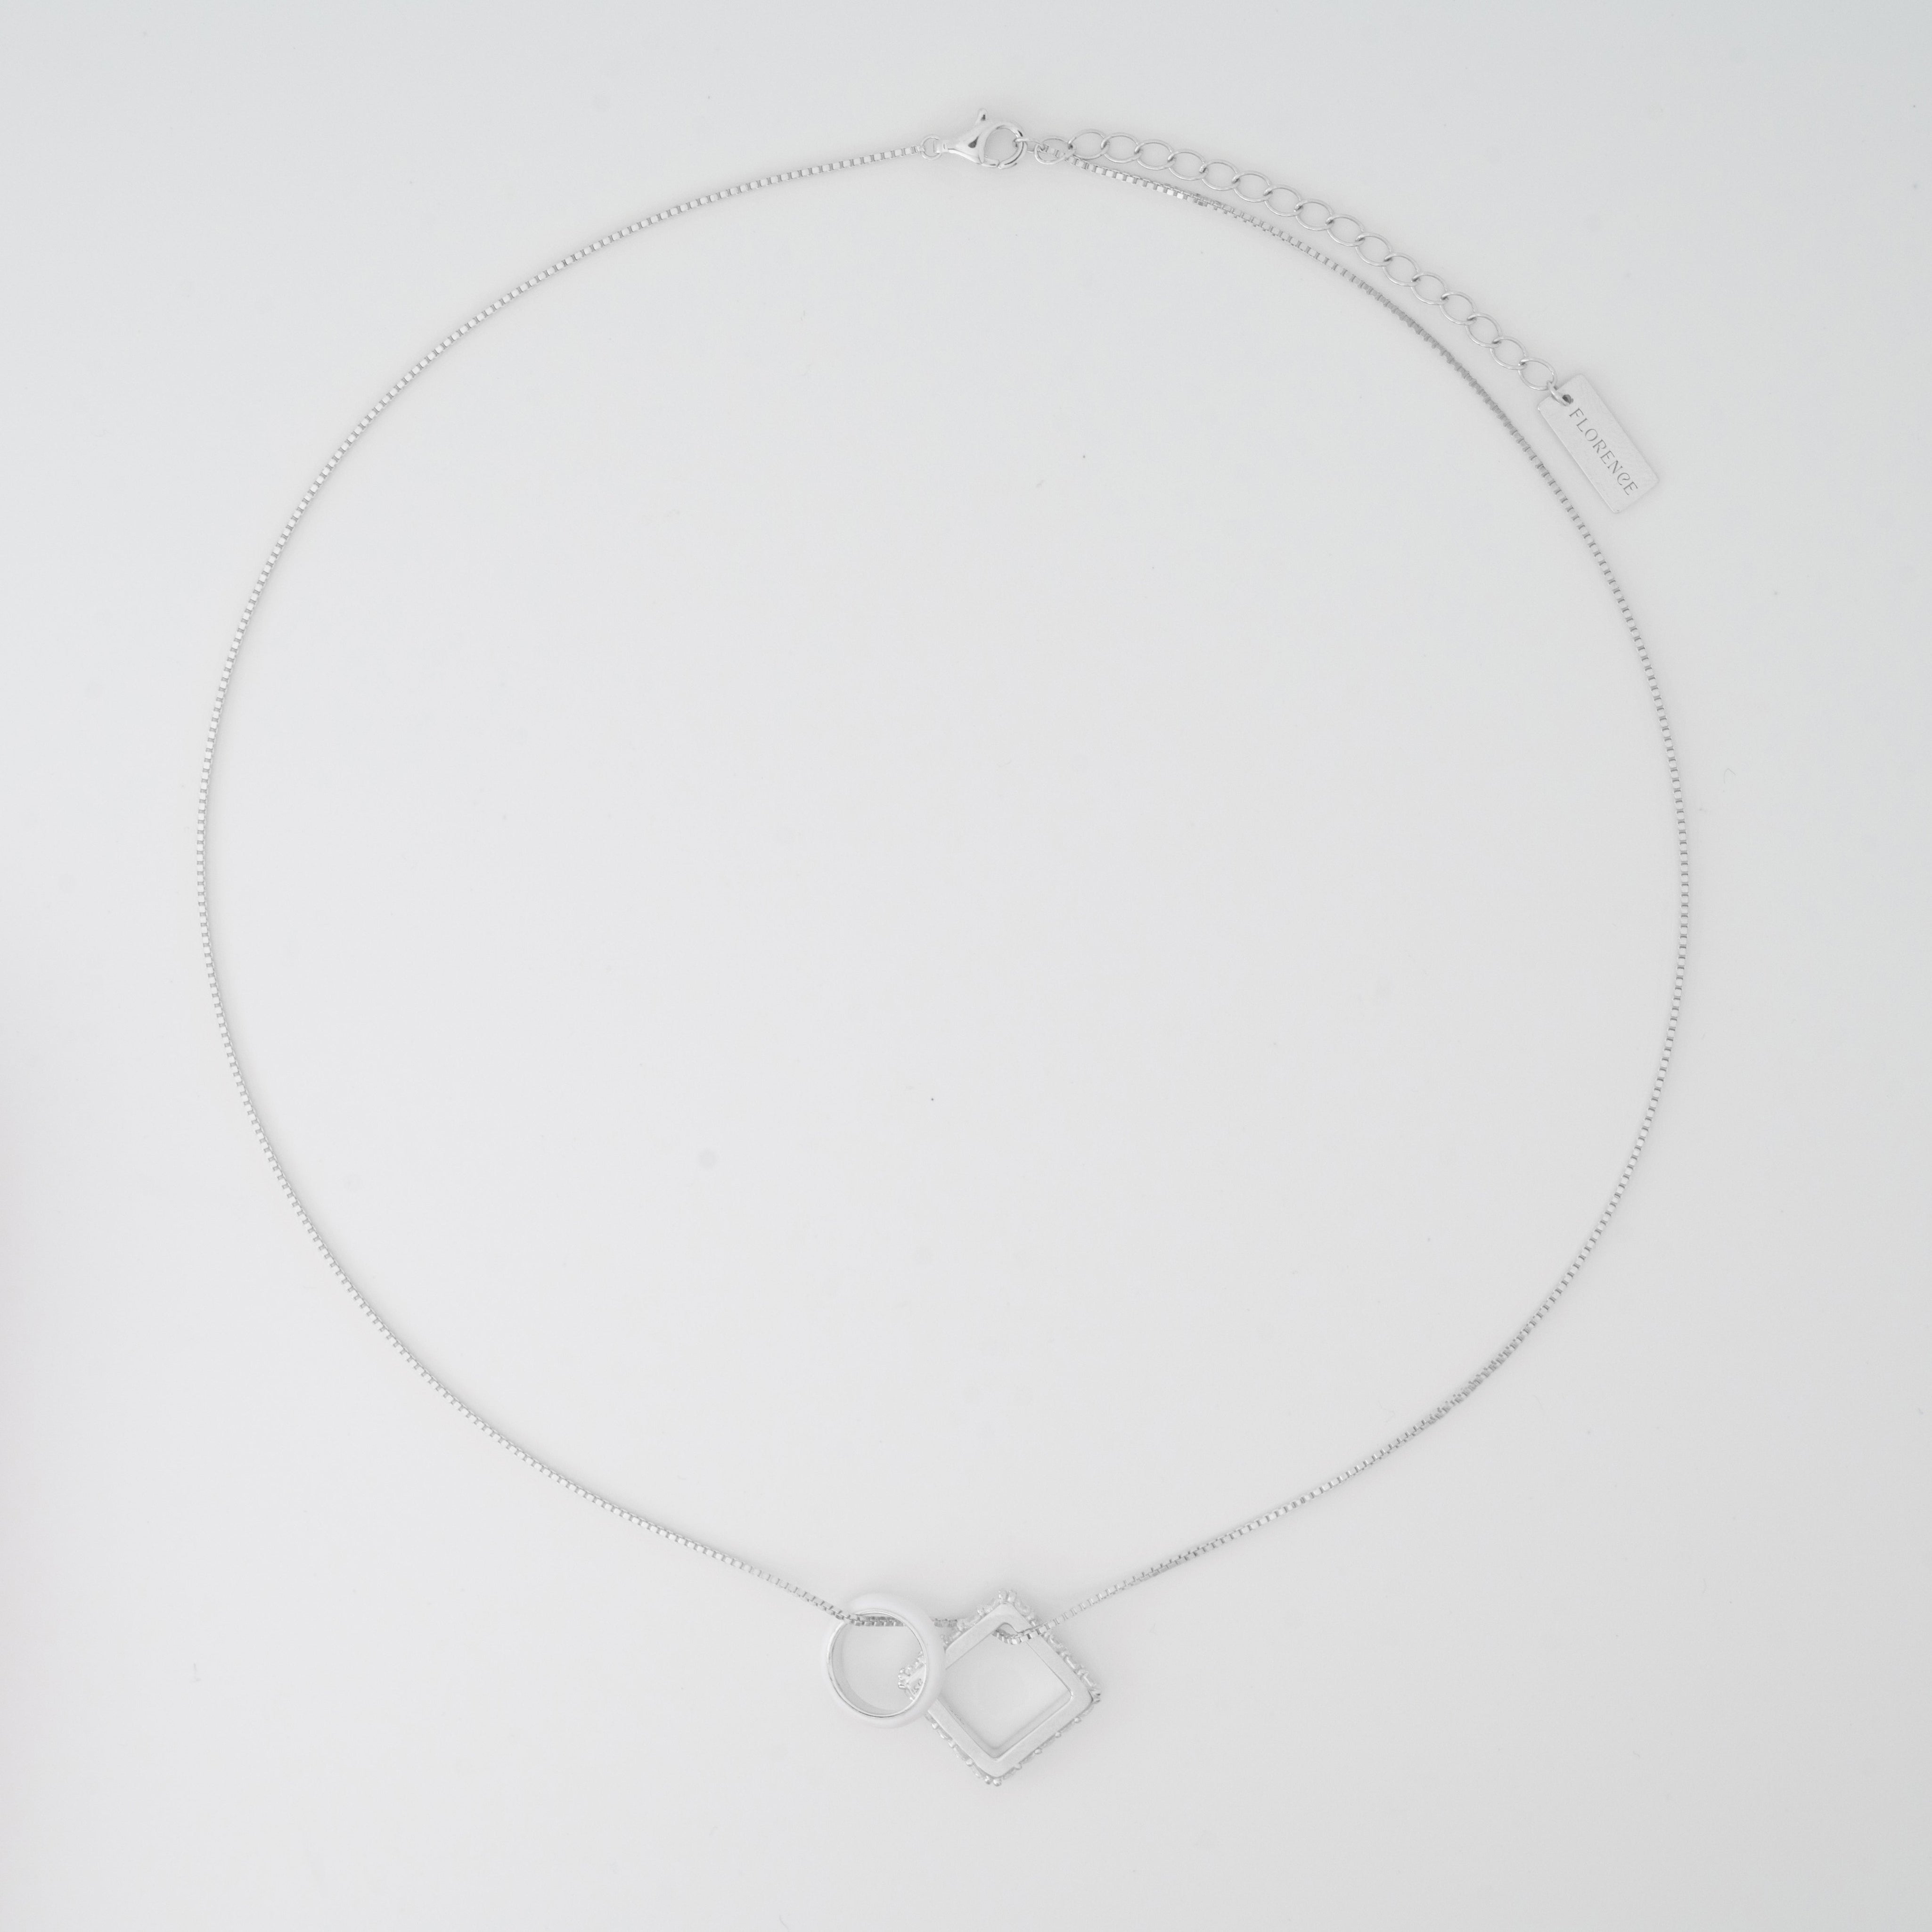 Nemy Stones and White Enamel Hoops Silver Necklace